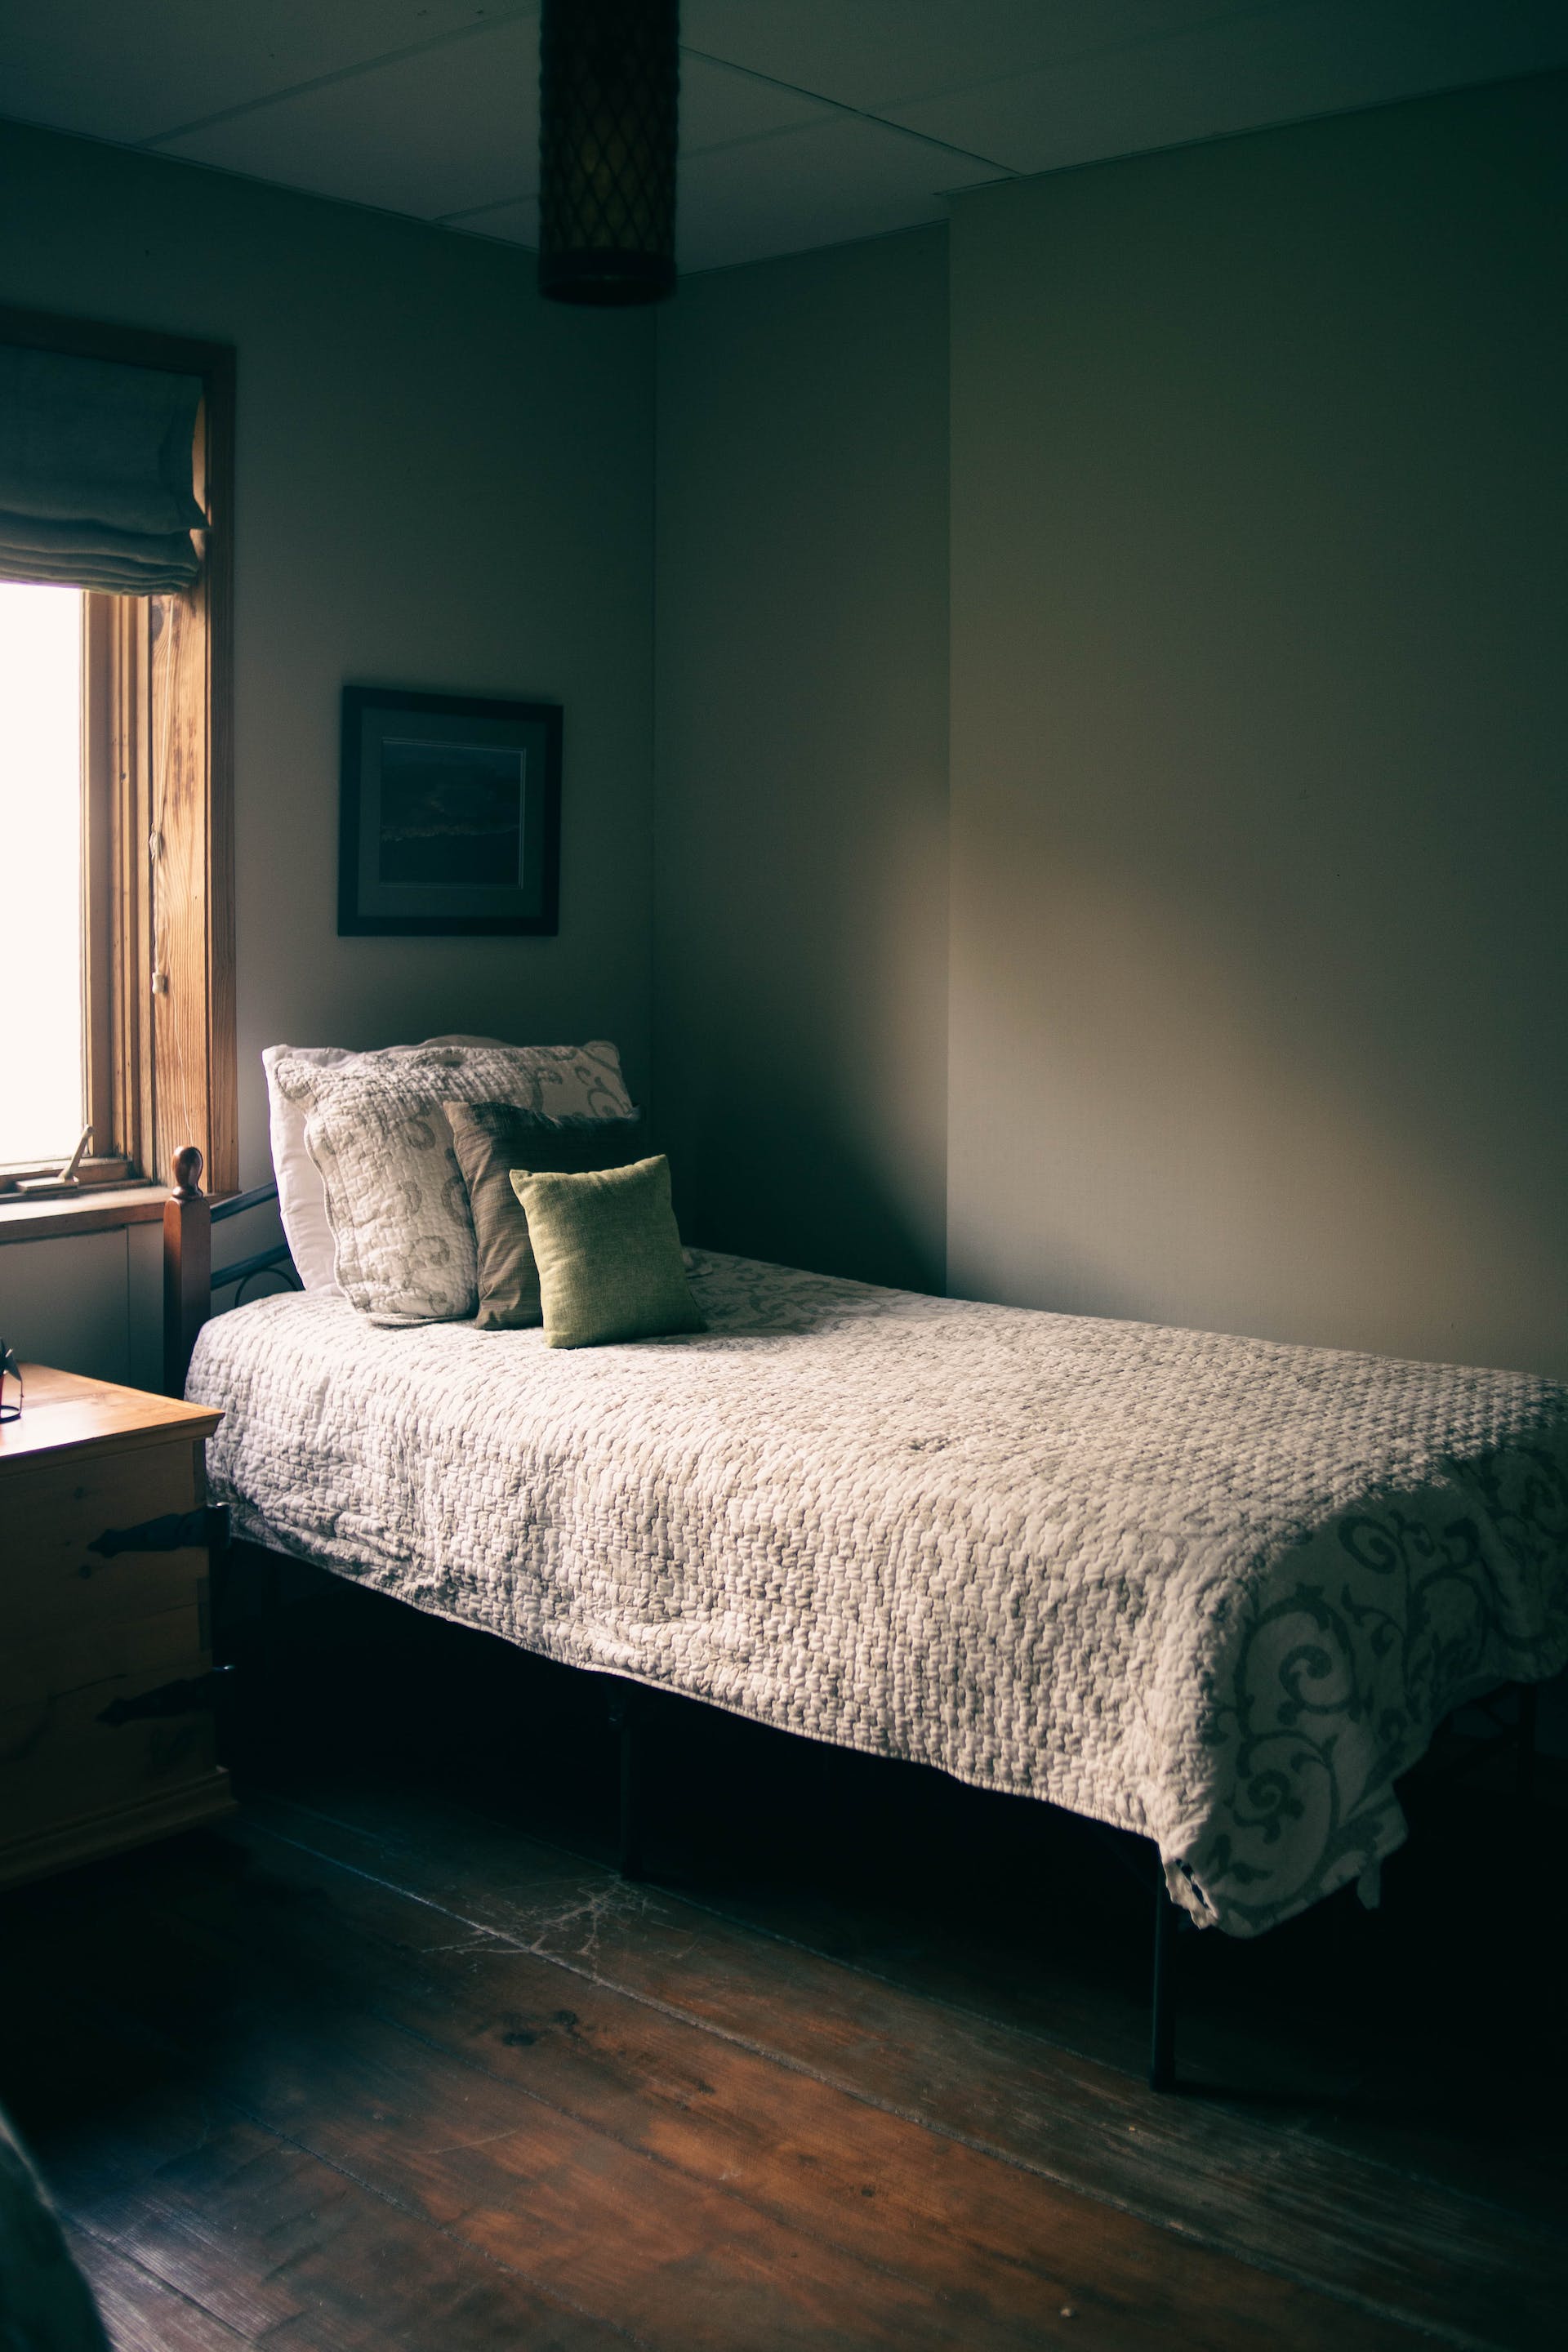 A single bed in a room | Source: Pexels